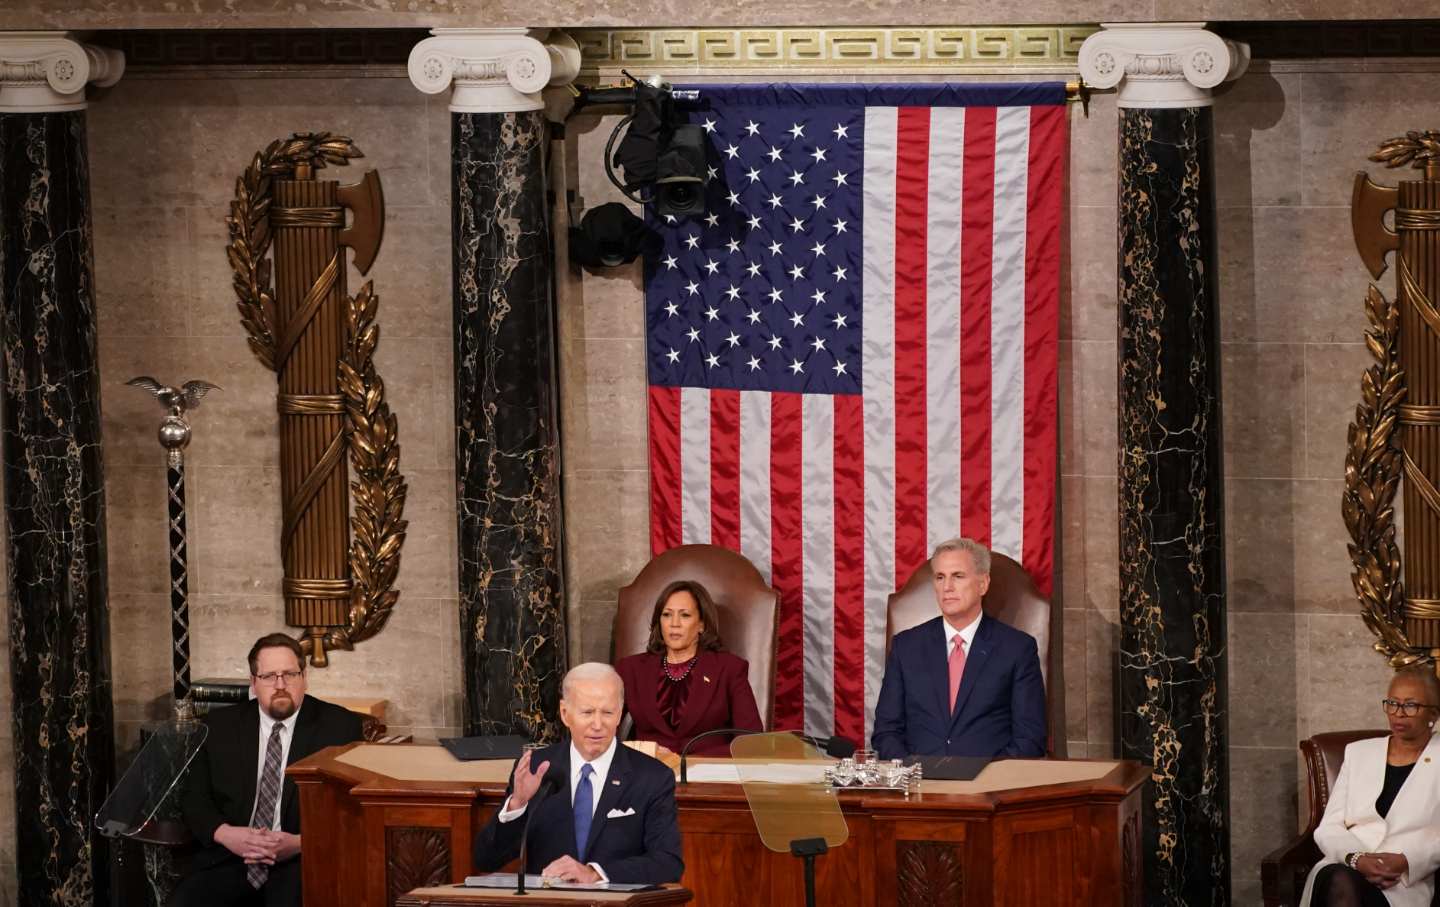 Joe Biden delivering the State of the Union